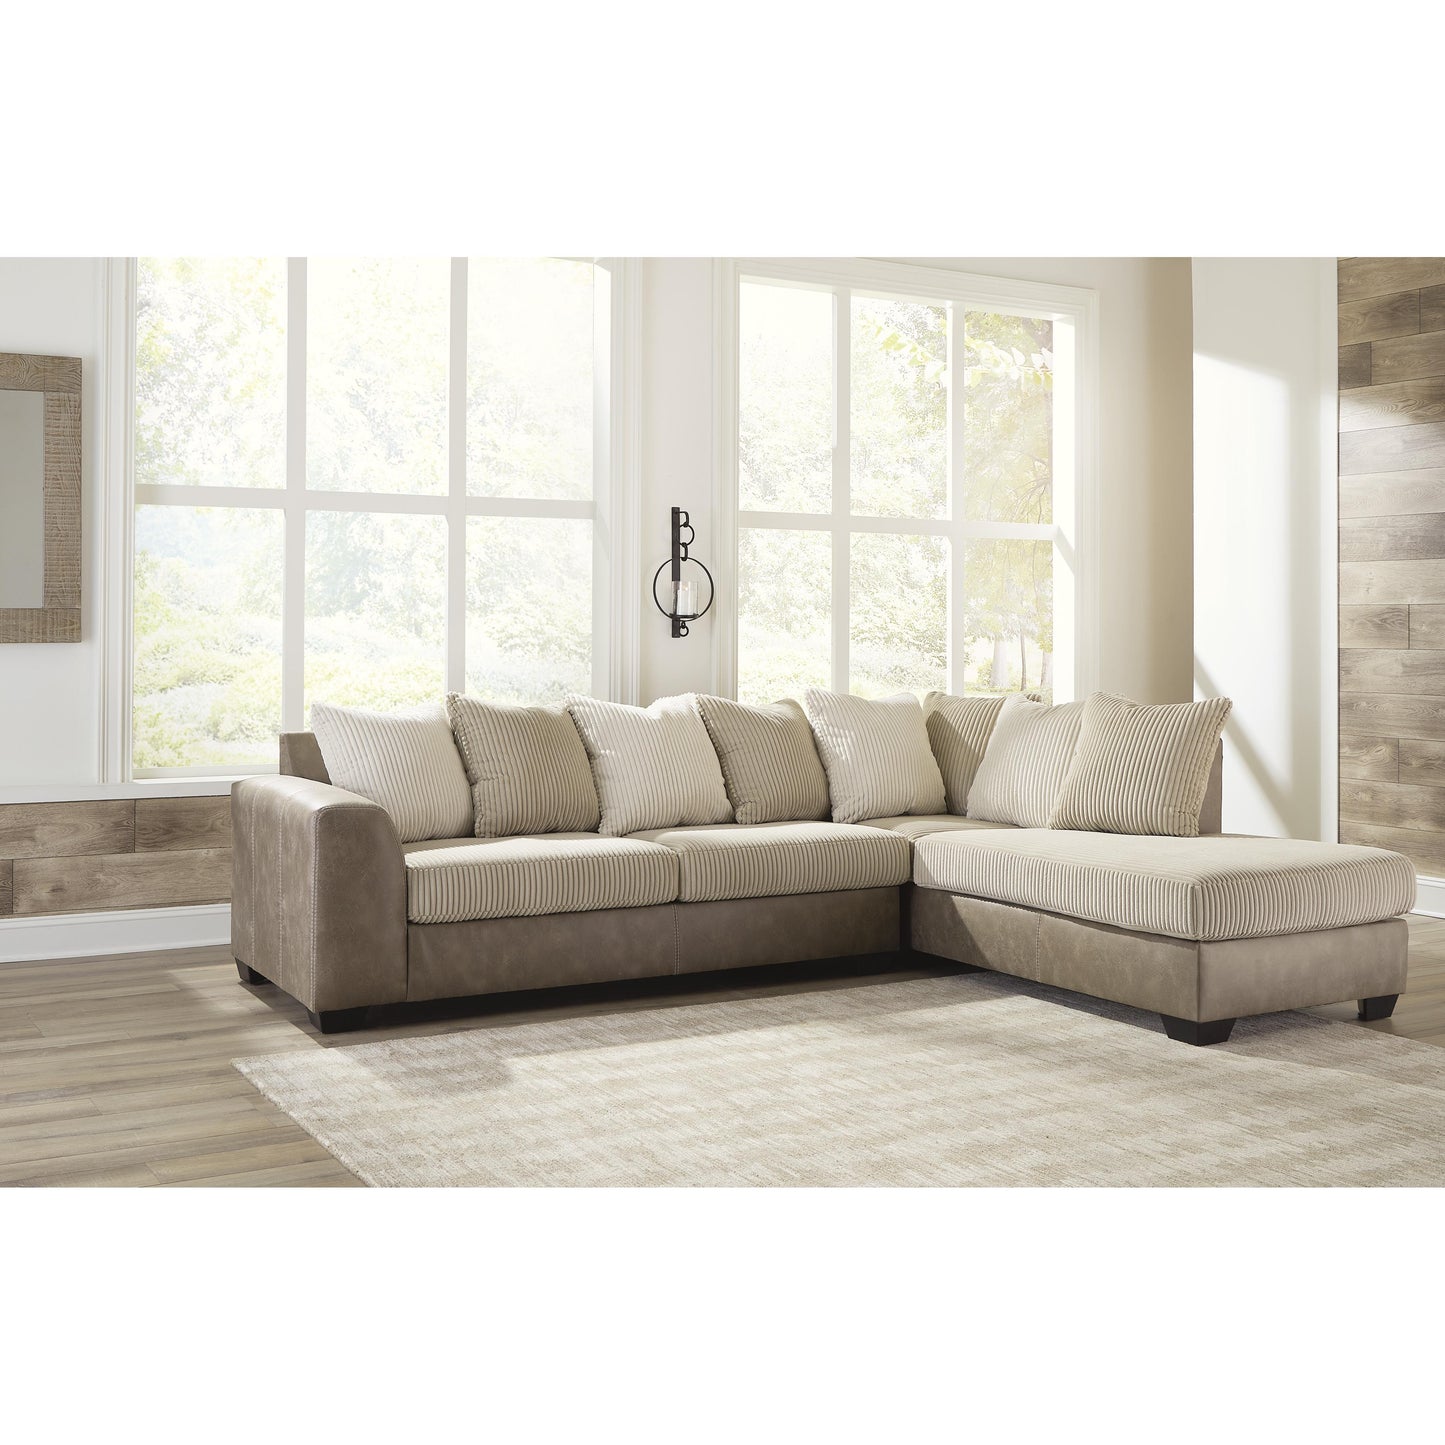 Signature Design by Ashley Keskin Fabric and Leather Look 2 pc Sectional 1840366/1840317 IMAGE 3